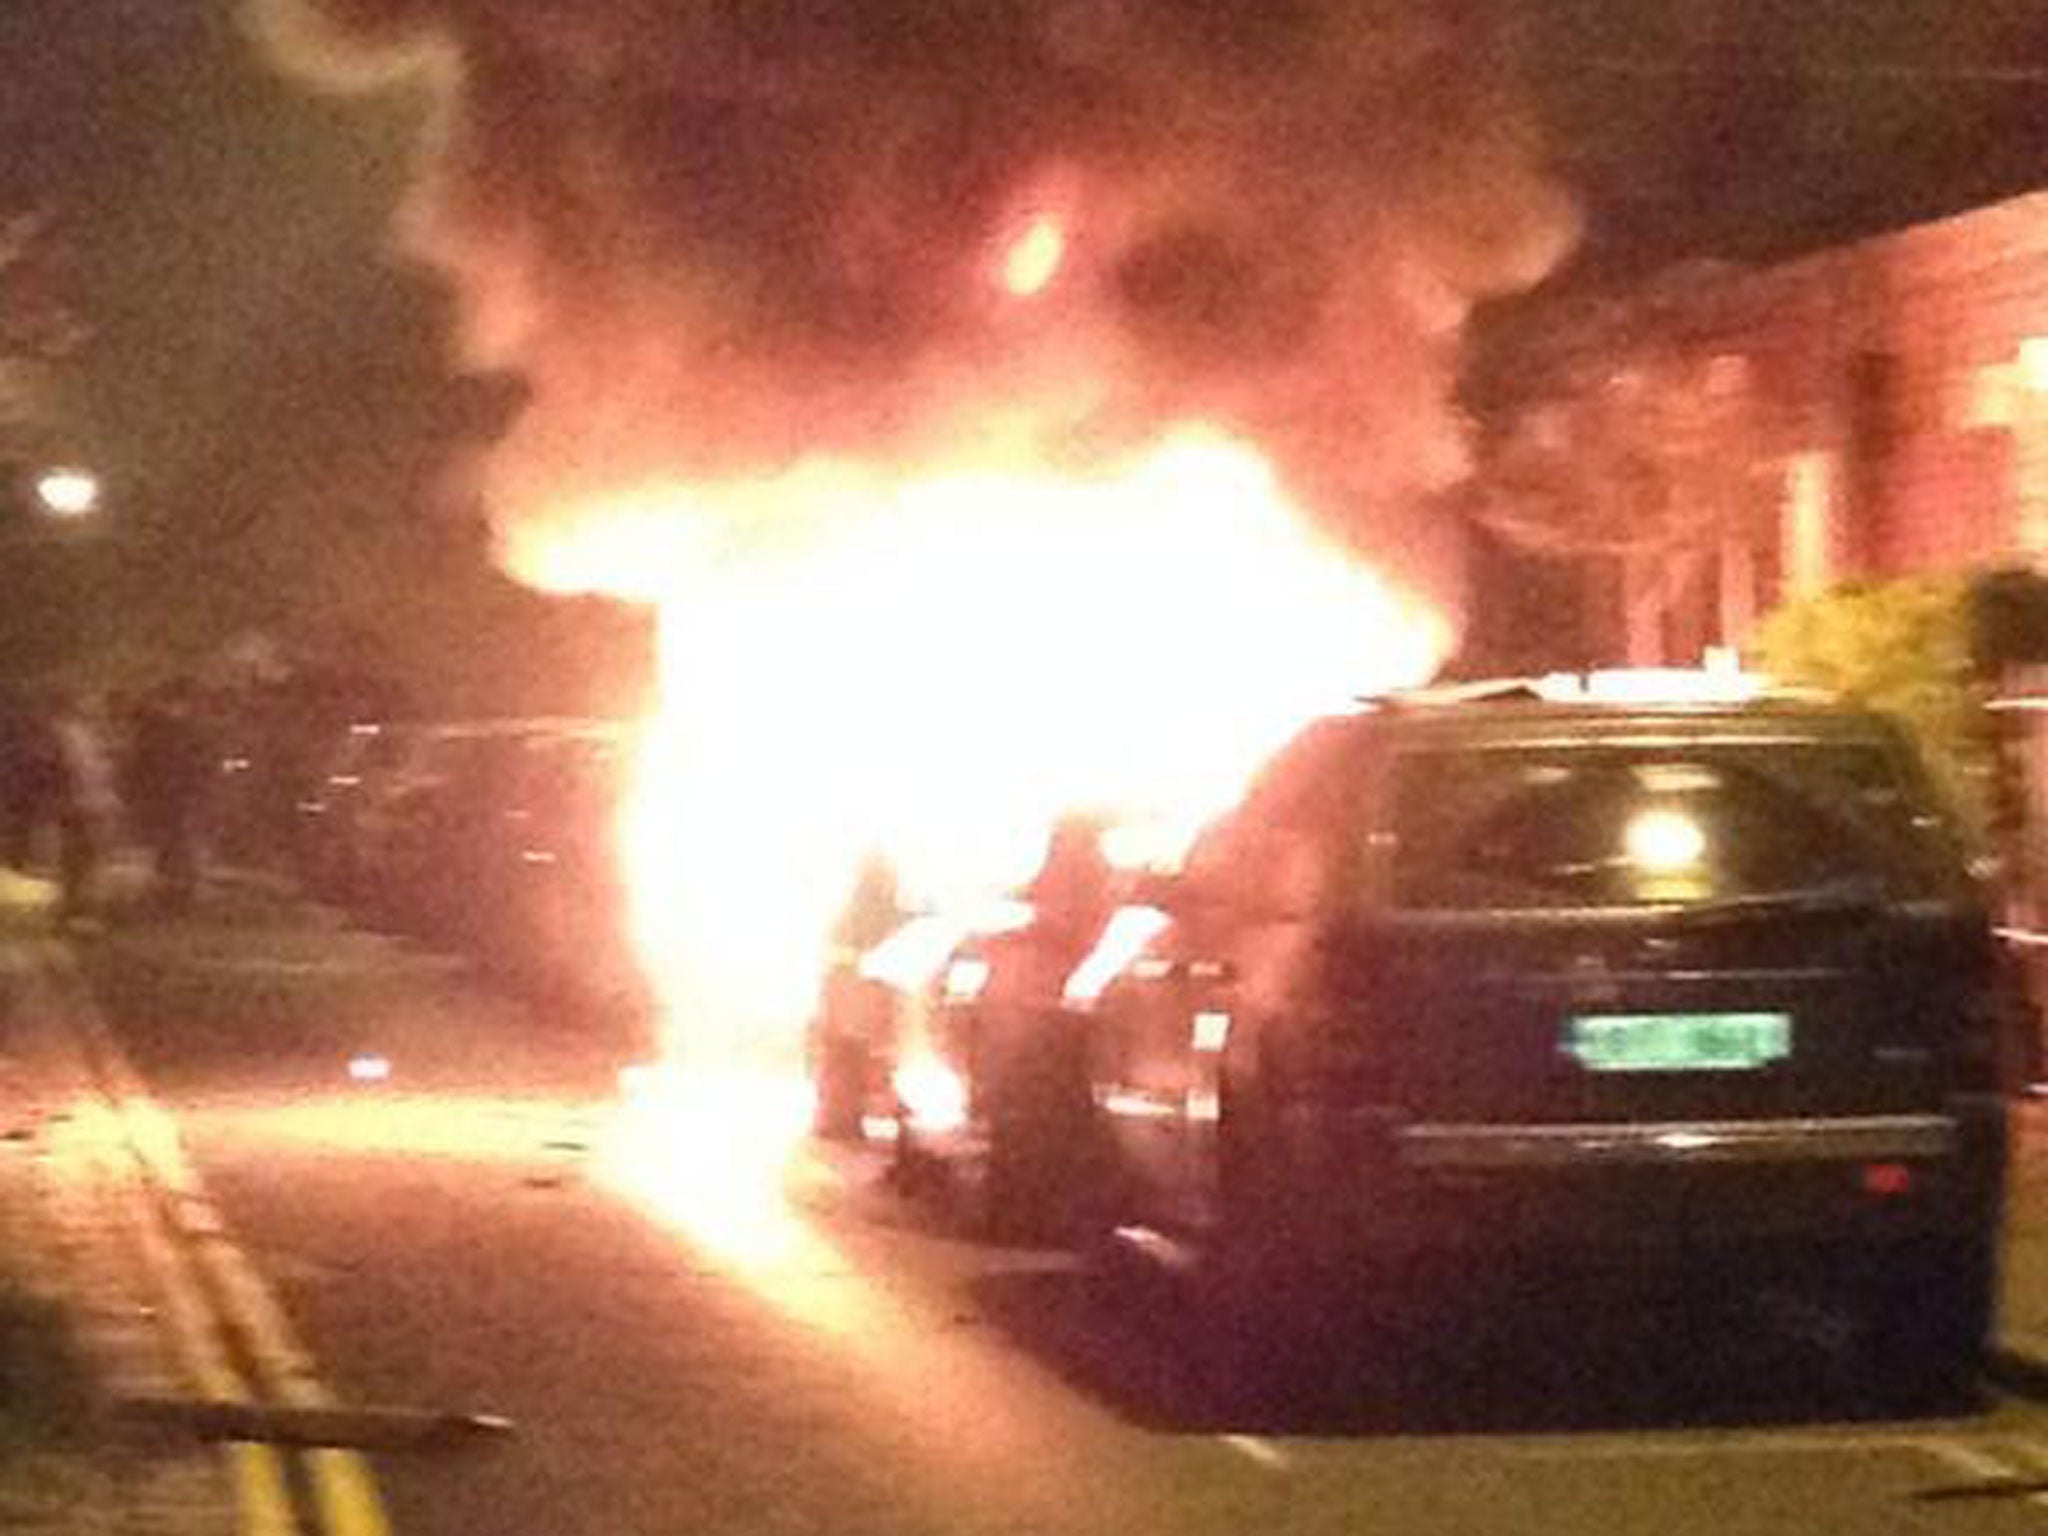 The car after a device detonated in Dublin